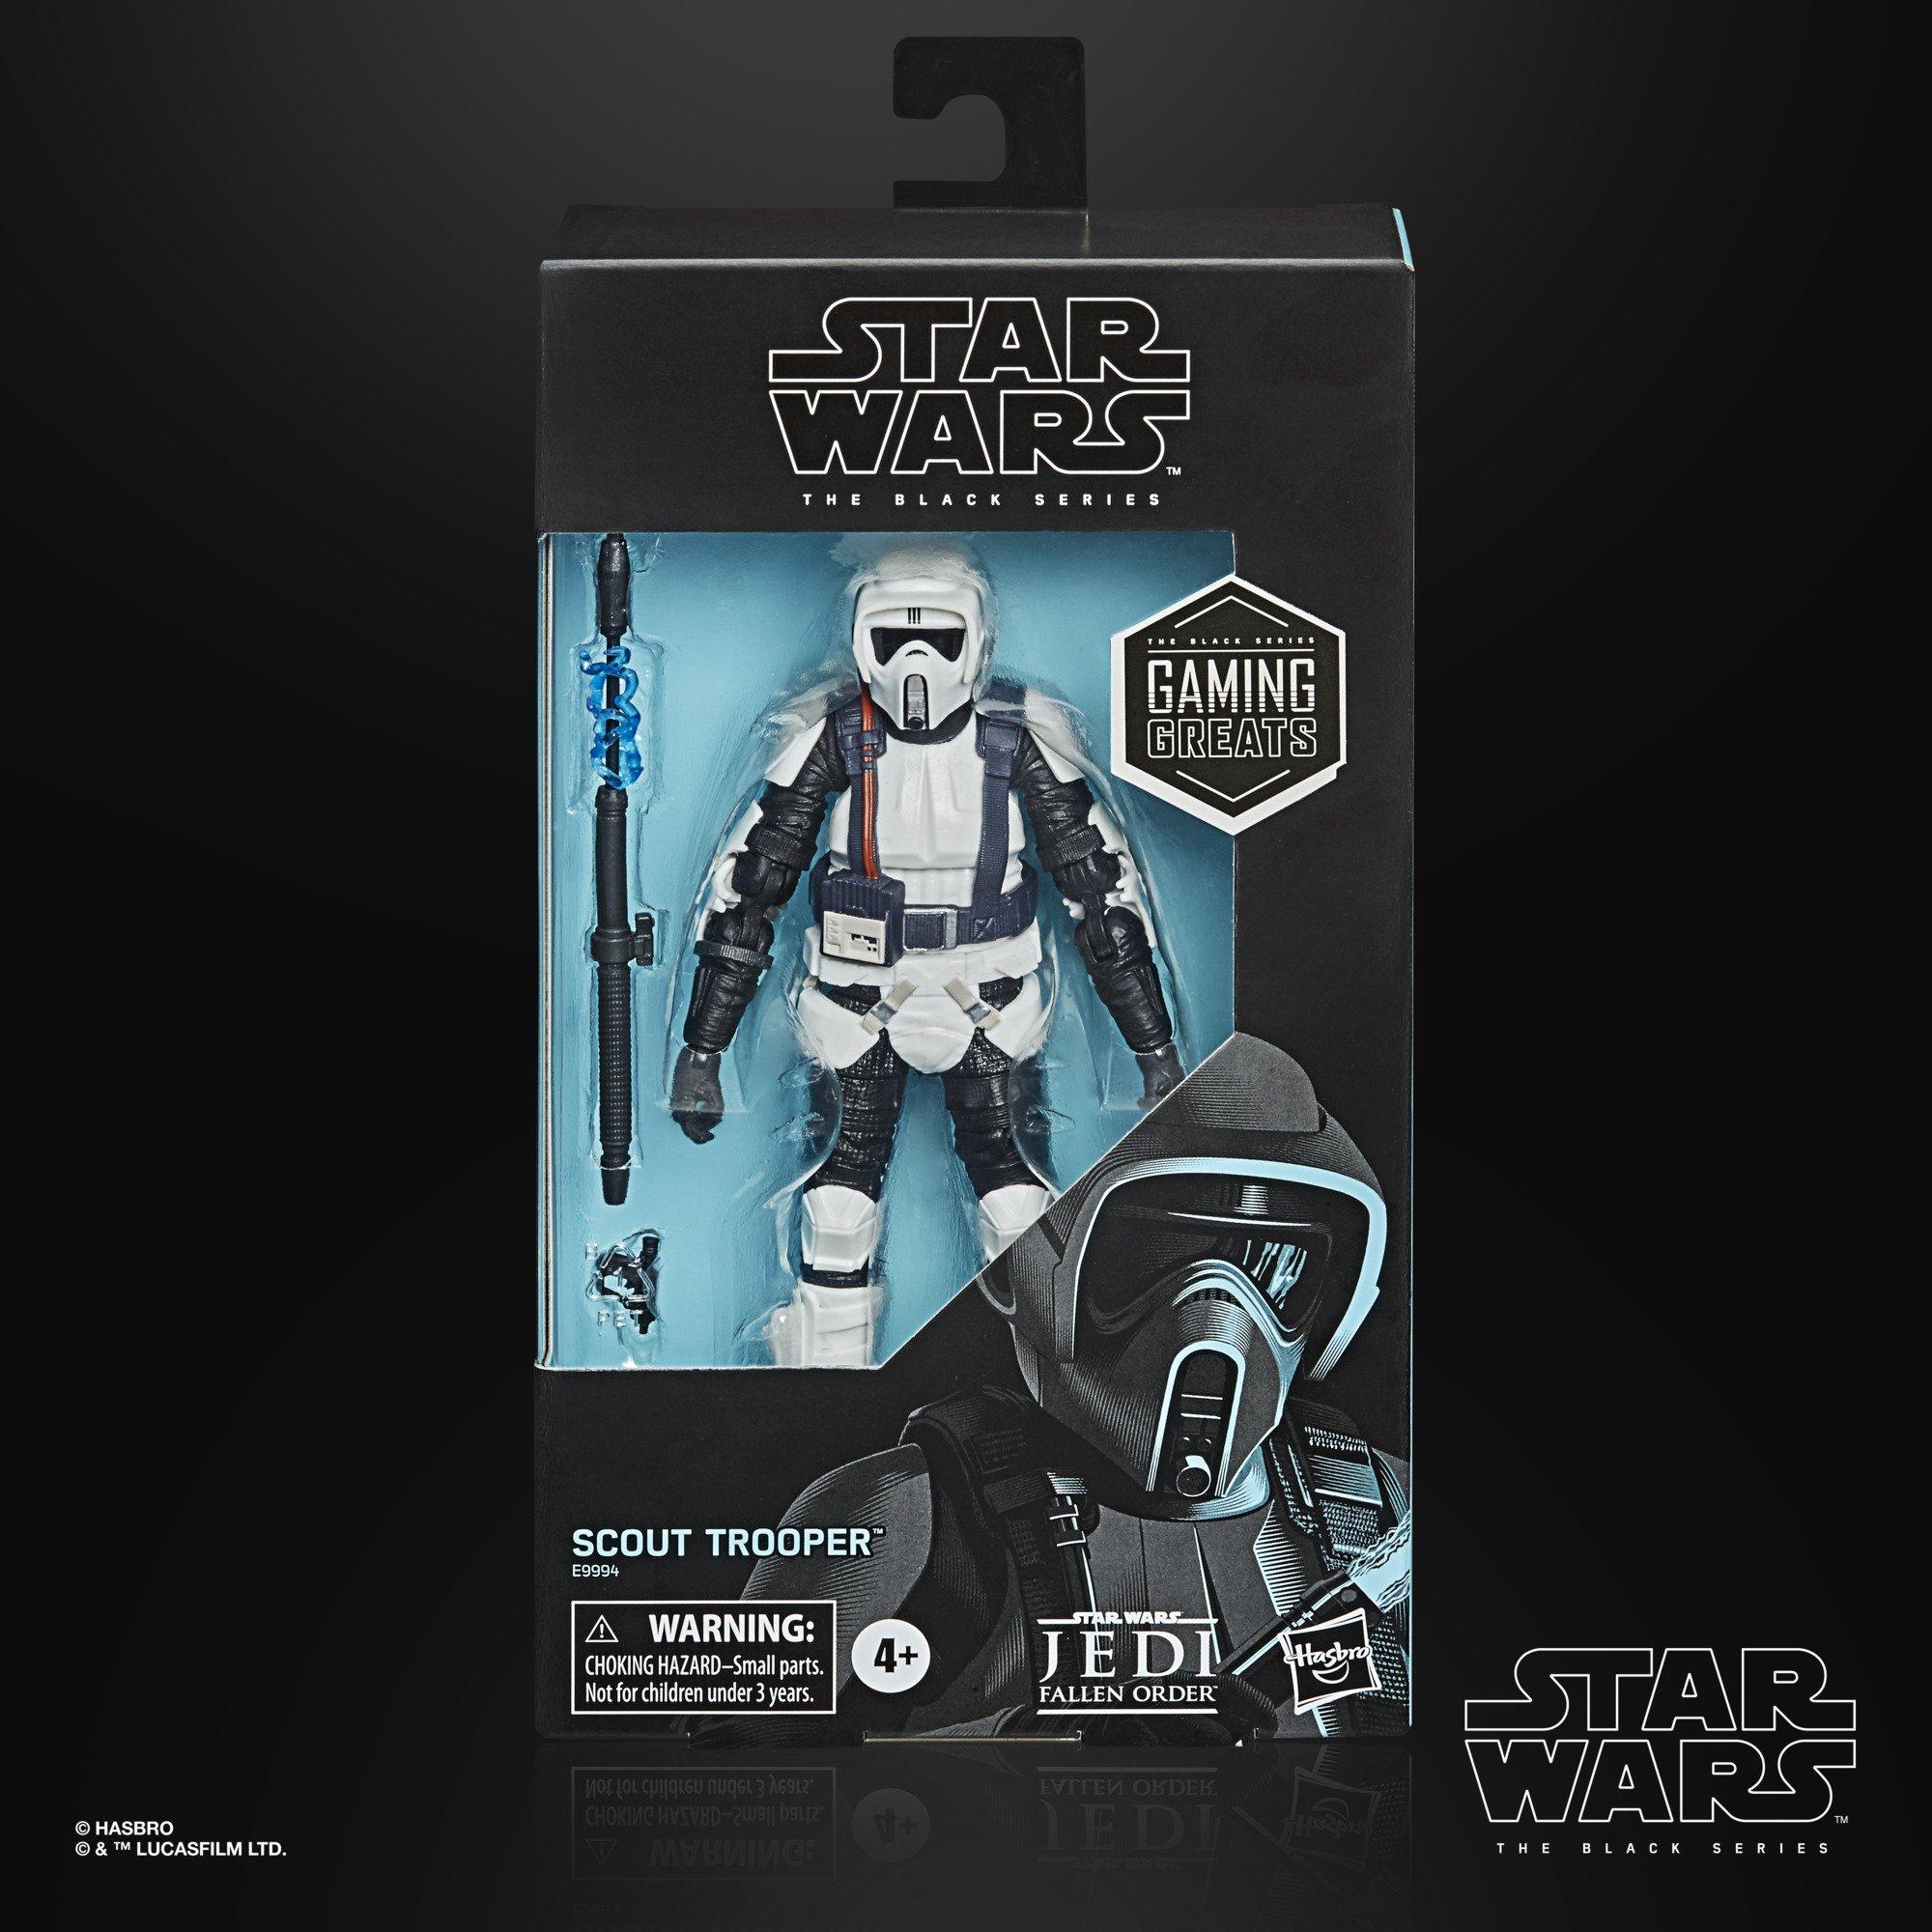 Star Wars Black Series: Scout Trooper added to Gaming Greats line